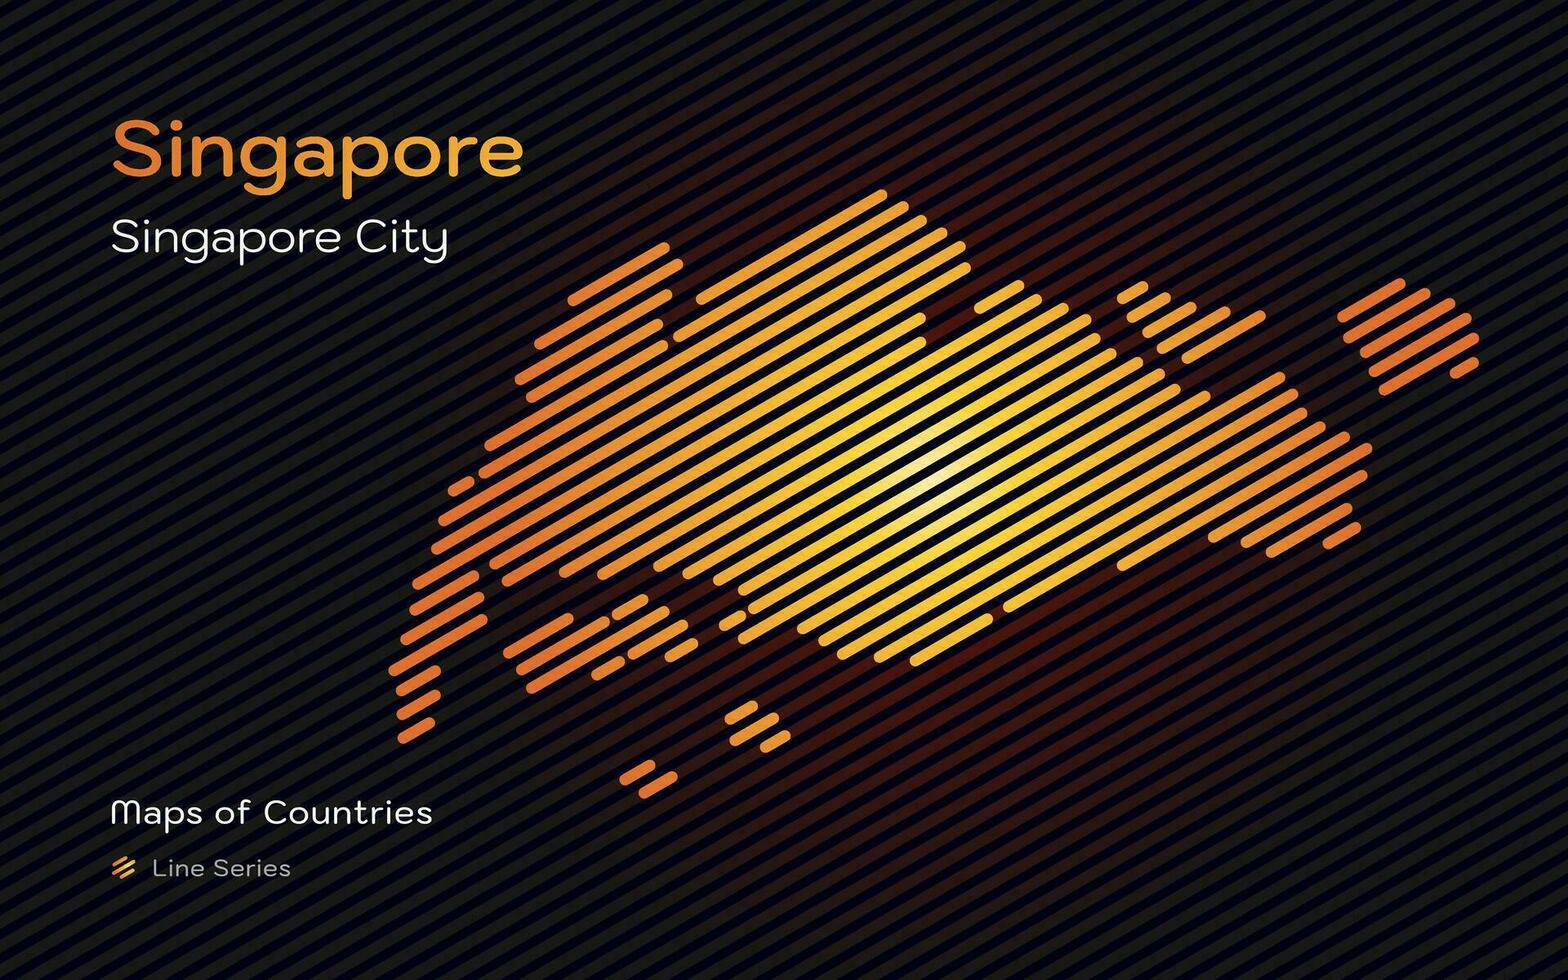 Singapore Gold Map Shown in a Line Pattern. Stylized simple vector map